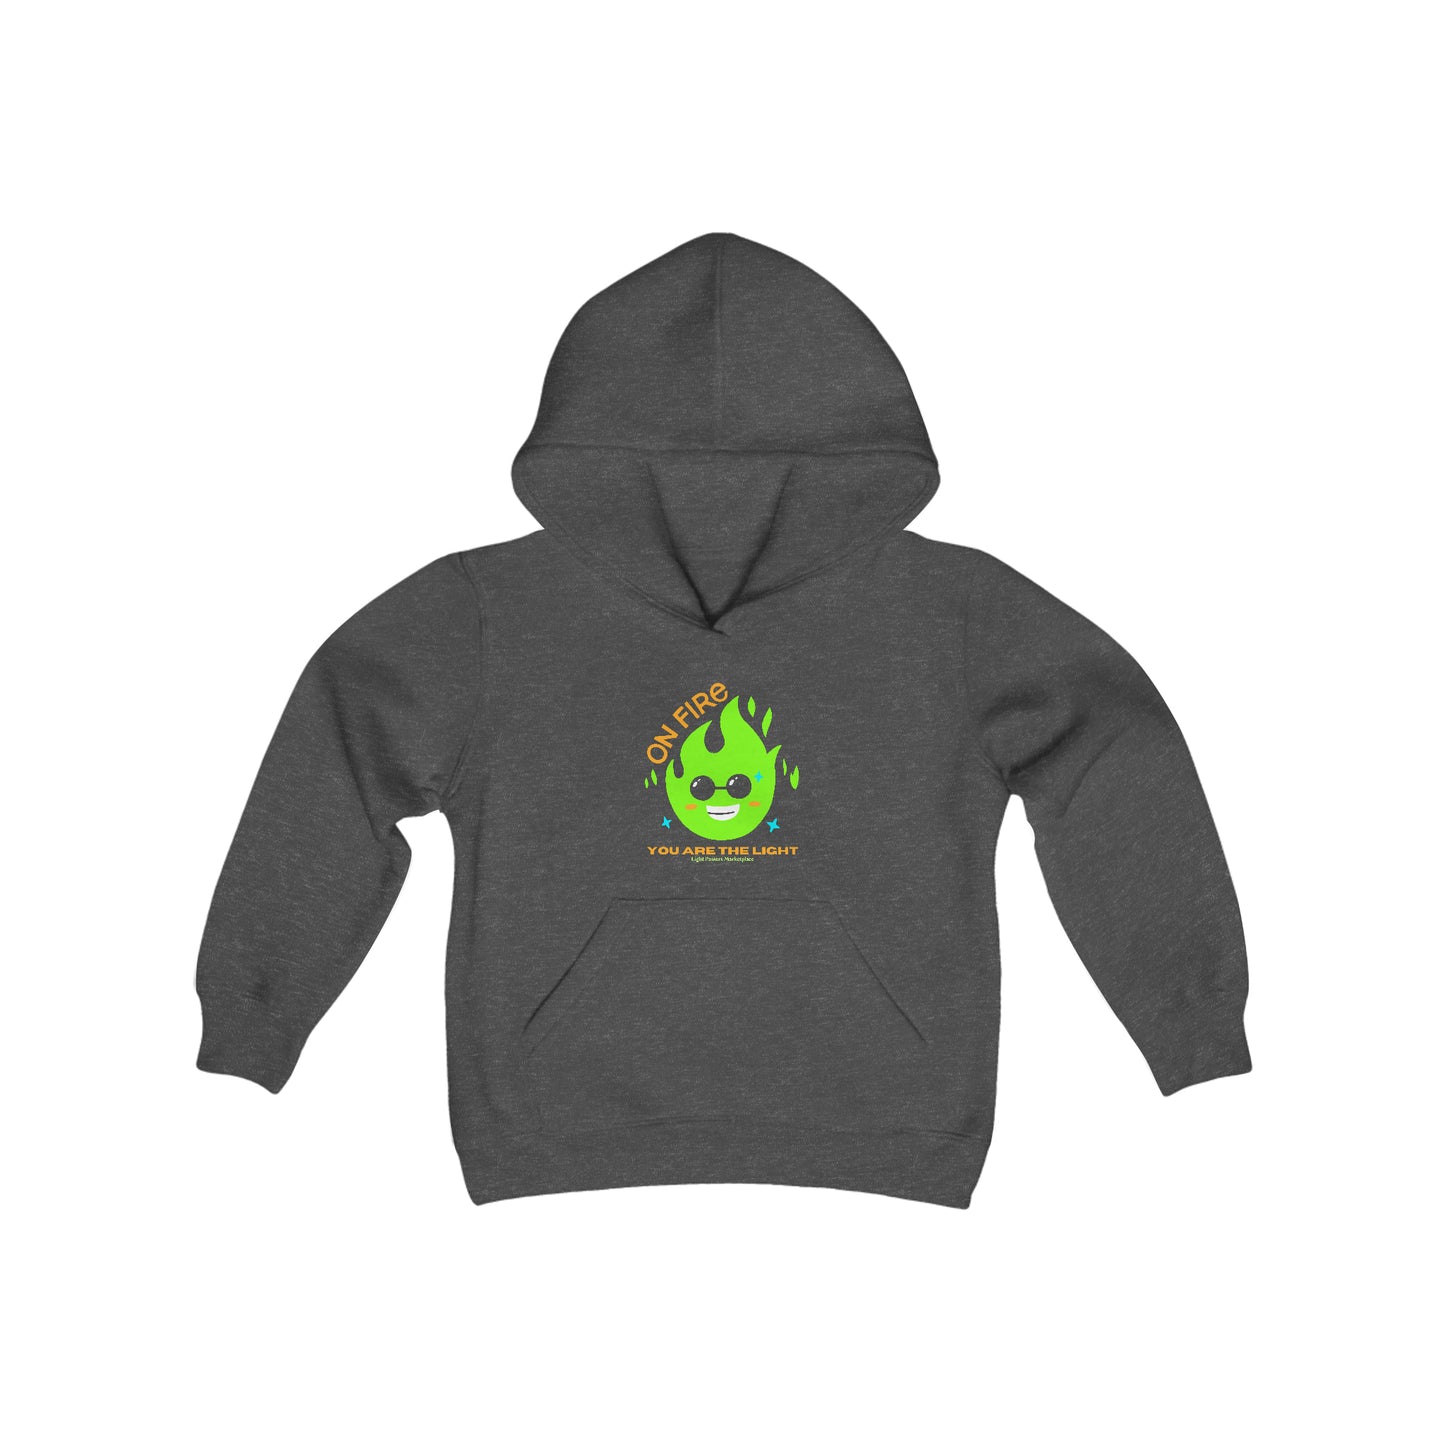 Light Passers Marketplace On Fire Youth Hooded Sweatshirt Simple Messages, Mental Health